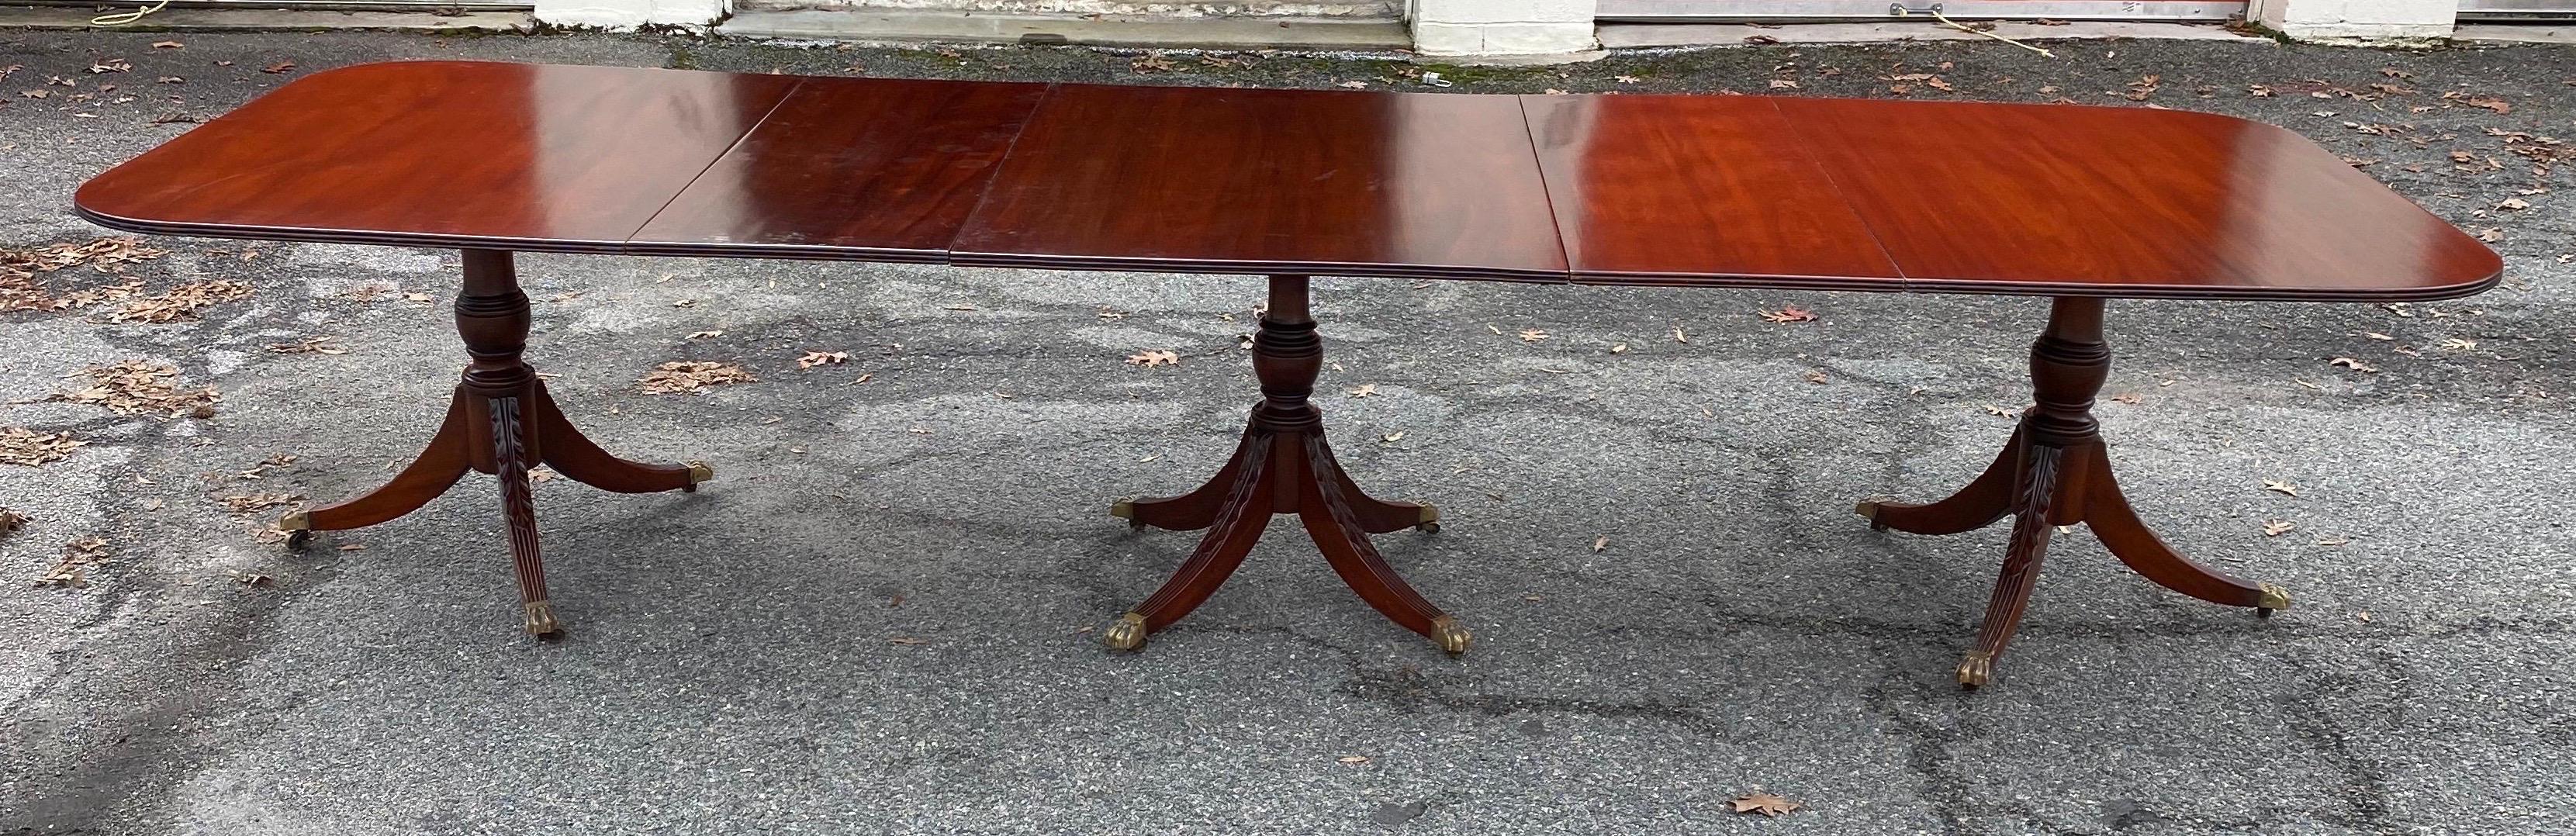 Great condition and color on this Georgian style mahogany triple pedestal dining table. Table has 2 removable leaves and is just shy of 140